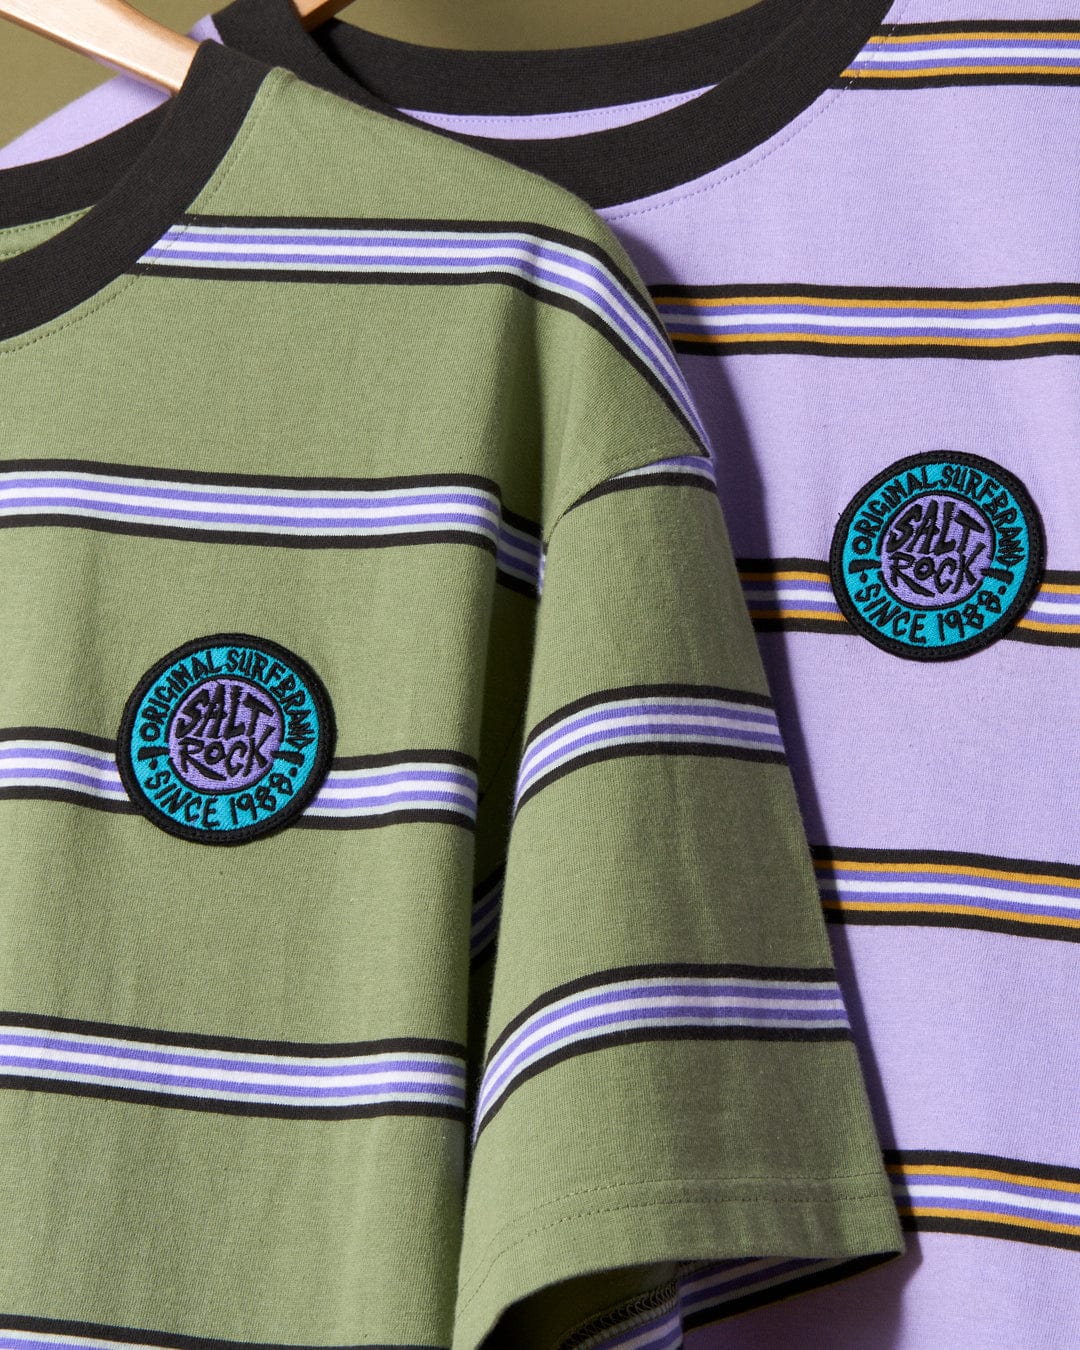 Striped casual SR Original - Mens Short Sleeve T-Shirts in Green with Saltrock branded embroidered patches displayed on wooden hangers.